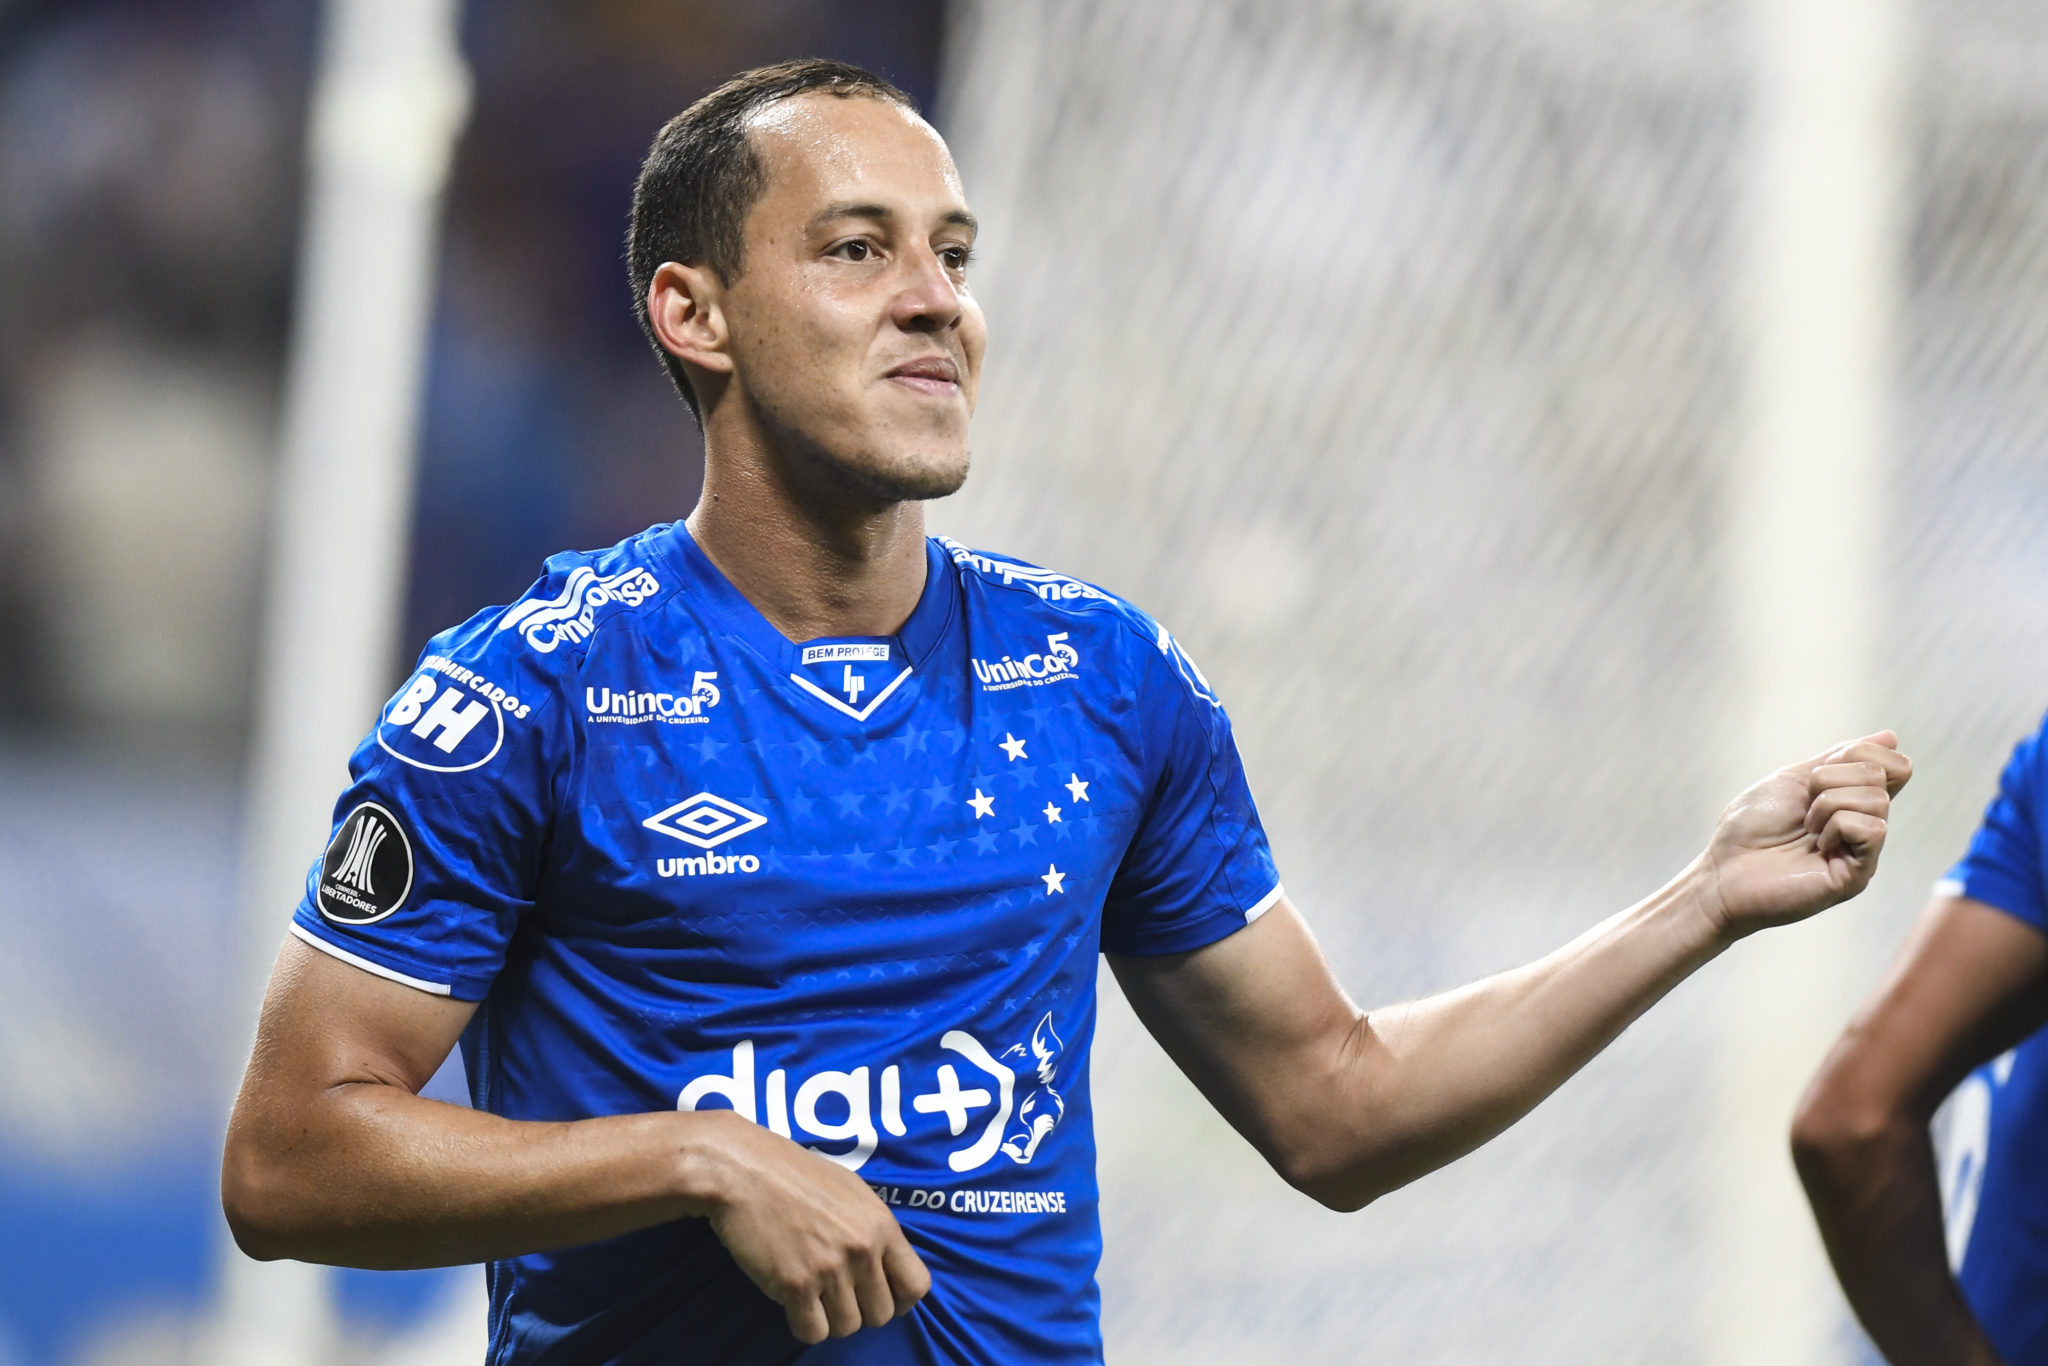 BELO HORIZONTE, BRAZIL - MARCH 27: Rodriguinho #23 of Cruzeiro celebrates after scoring his team's first goal during a match between Cruzeiro and Deportivo Lara as part of Copa CONMEBOL Libertadores 2019 at Mineirao stadium on March 27, 2019 in Belo Horizonte, Brazil. (Photo by Pedro Vilela/Getty Images)